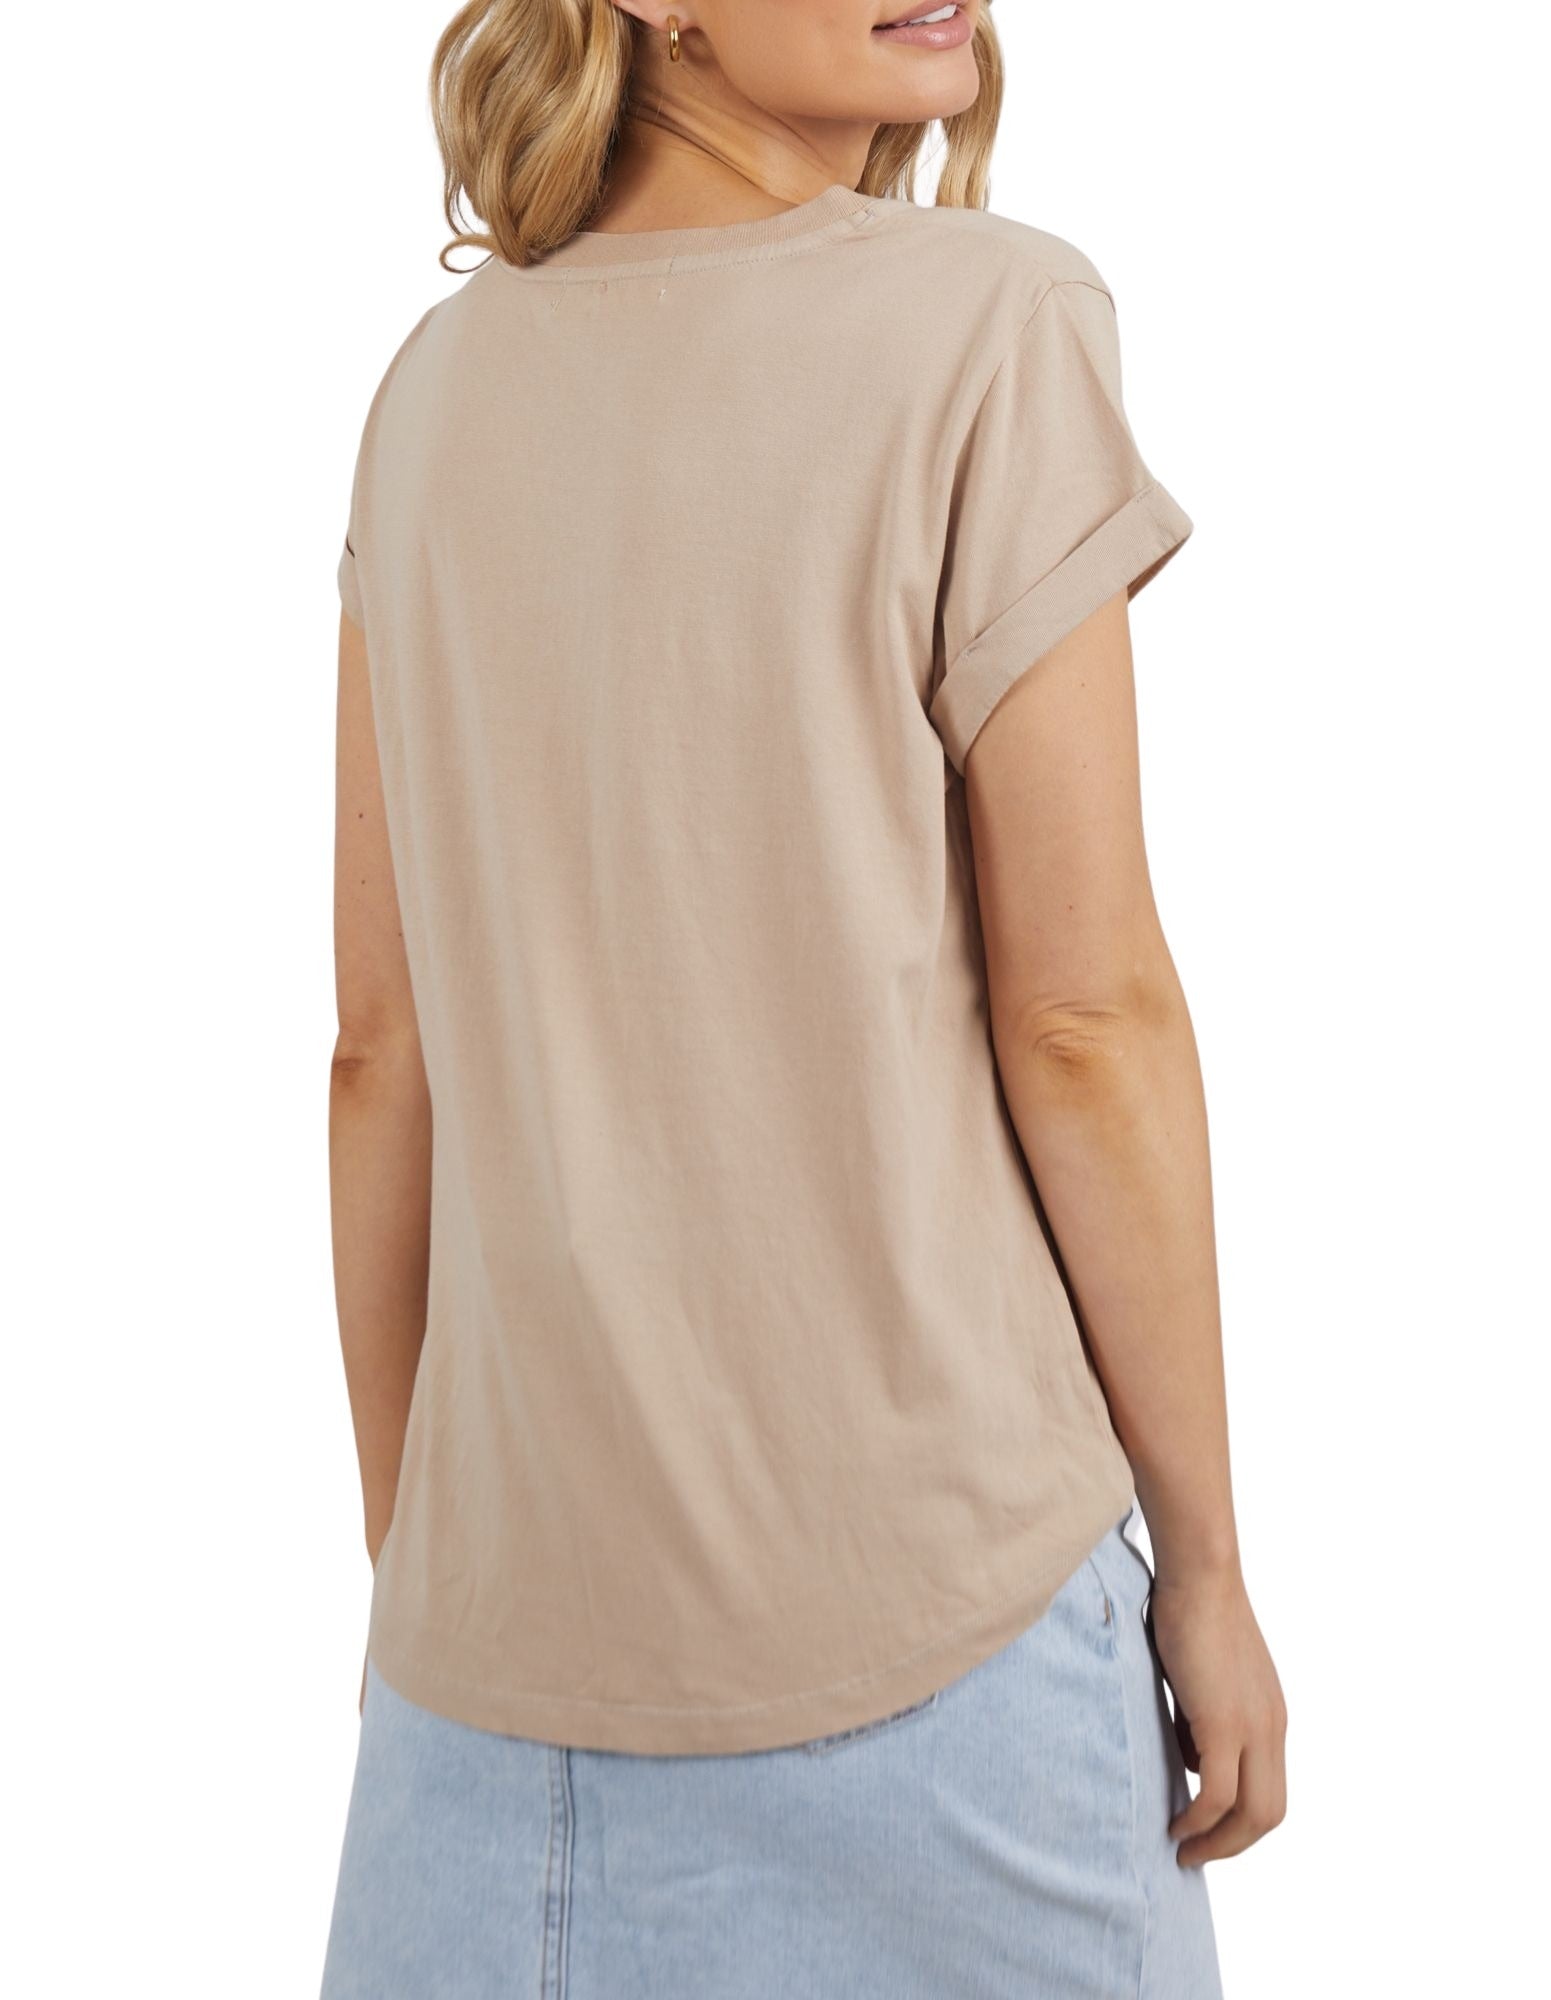 Foxwood Manly Vee Tee - Oatmeal